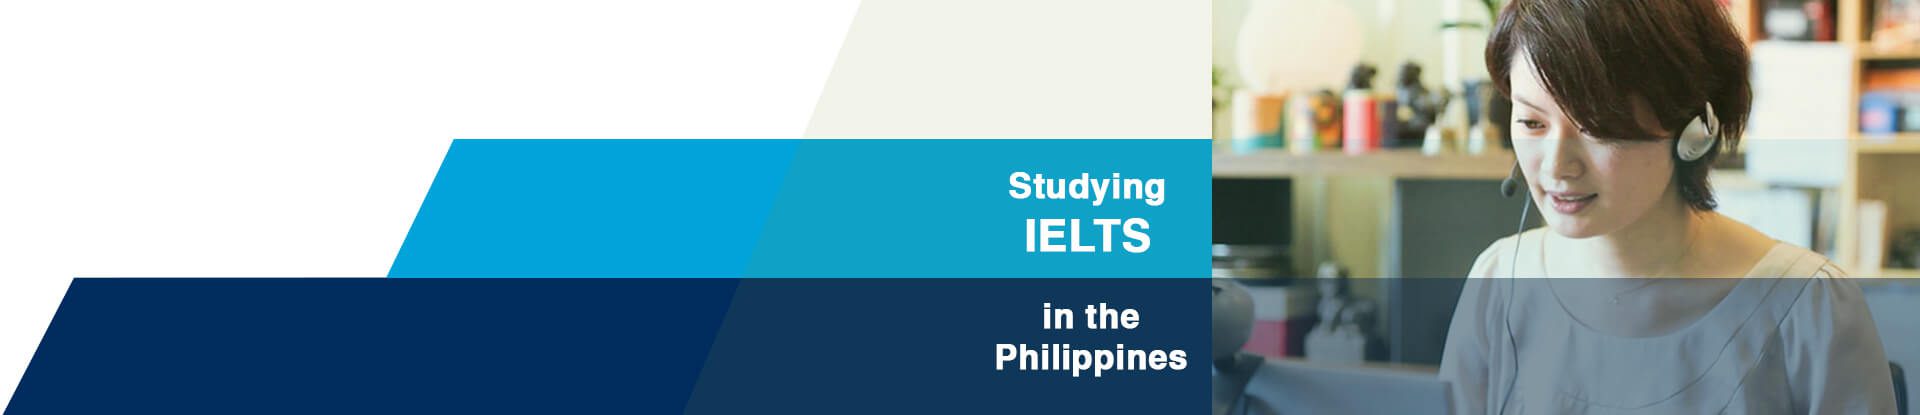 studying IELTS in the Philippines